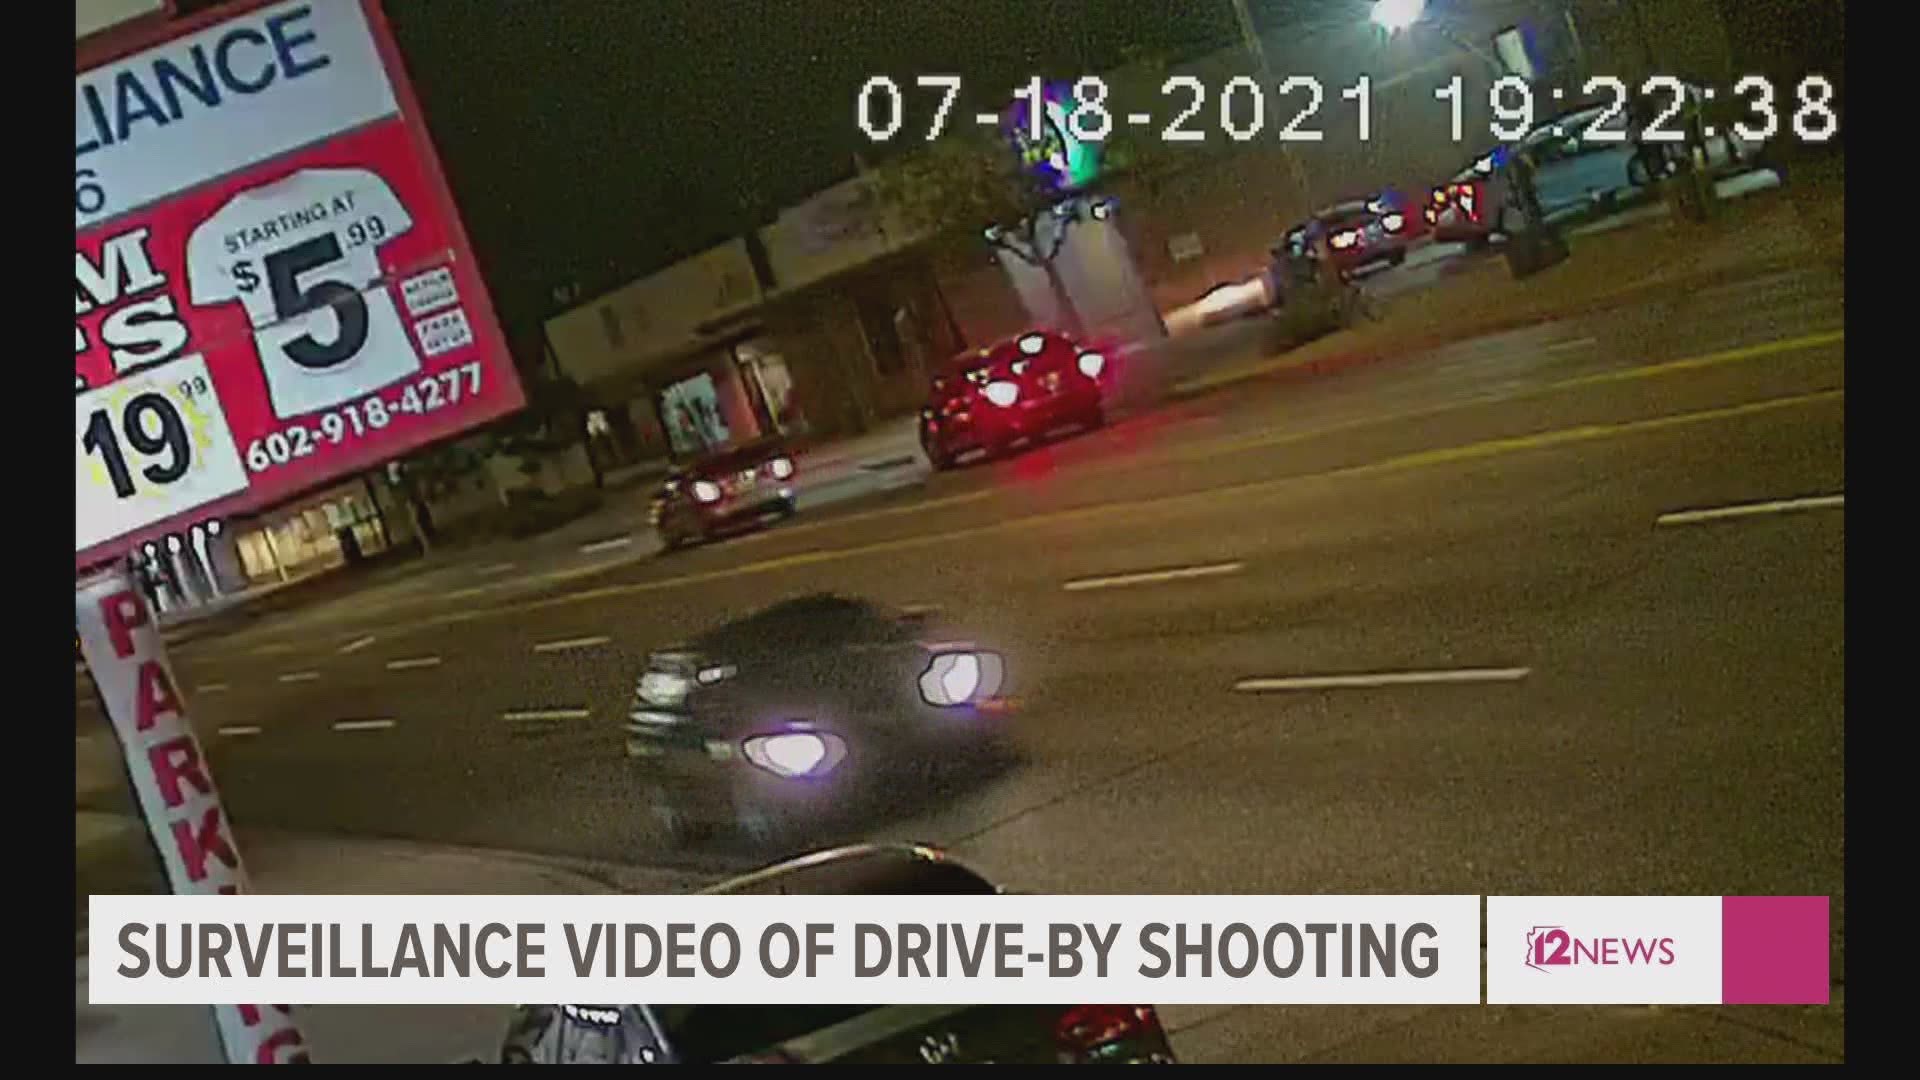 Police recently released surveillance video footage connected to a drive-by shooting incident in Phoenix near a food truck event in July. Tram Mai has the update.